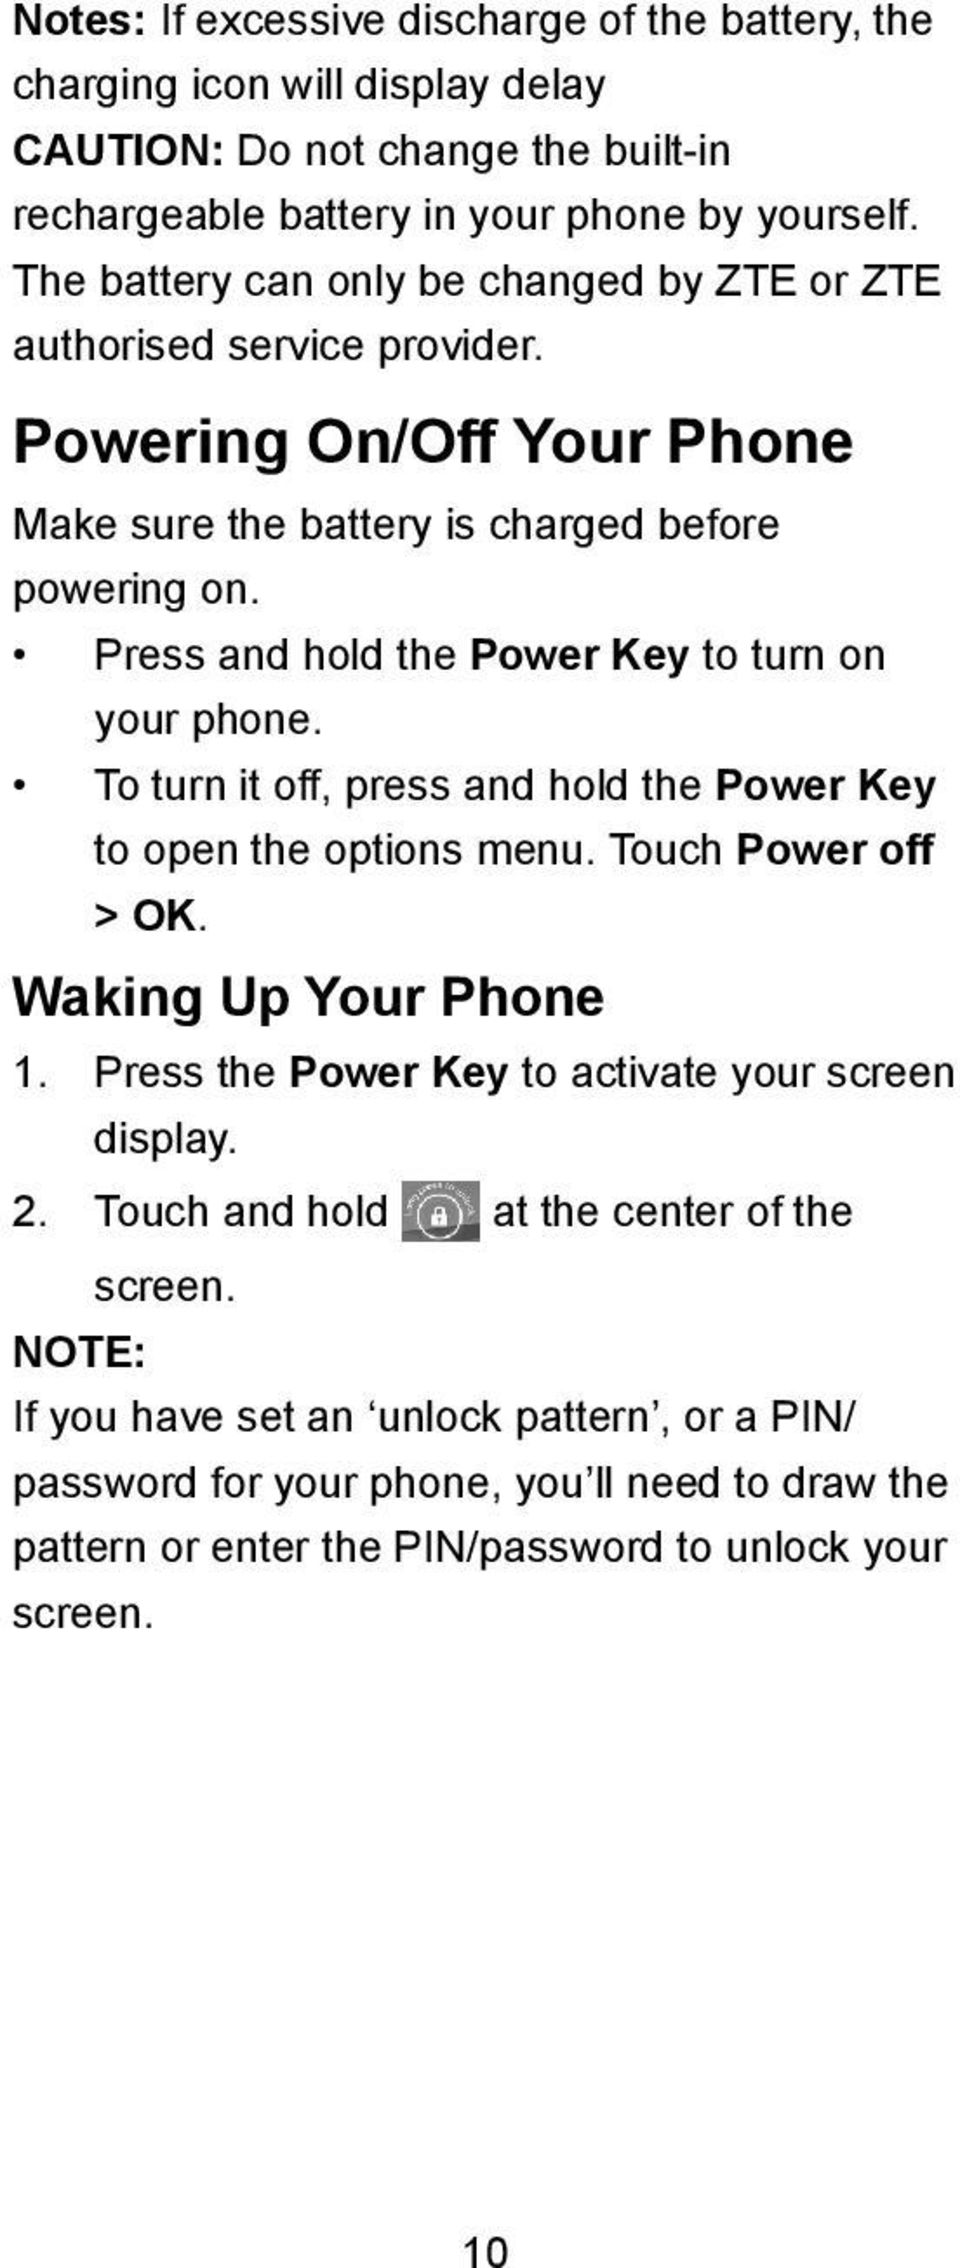 Press and hold the Power Key to turn on your phone. To turn it off, press and hold the Power Key to open the options menu. Touch Power off > OK. Waking Up Your Phone 1.